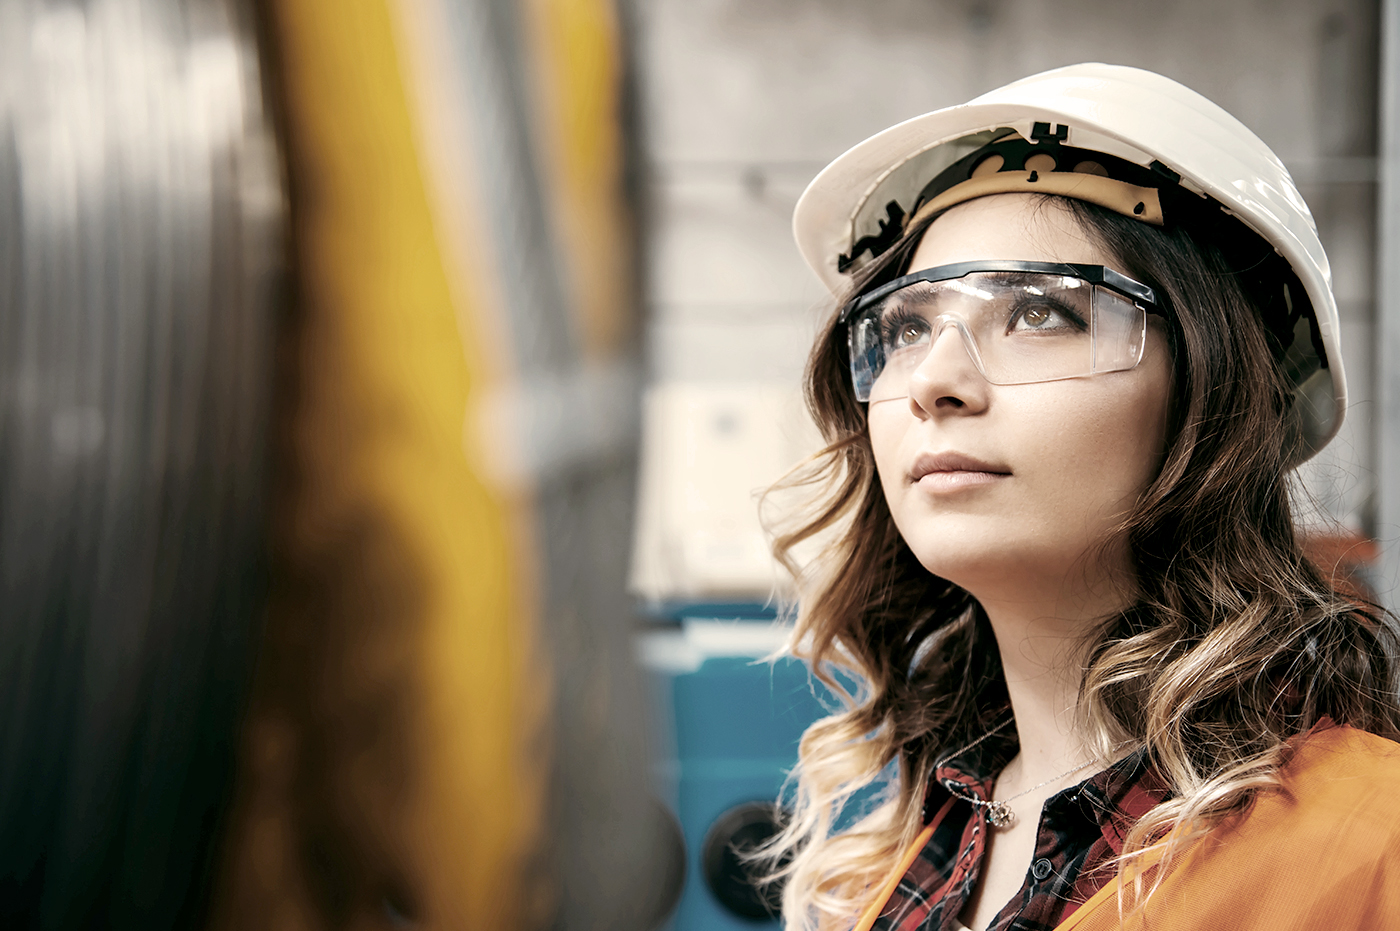 A woman wearing safety goggles and a hardhat working.